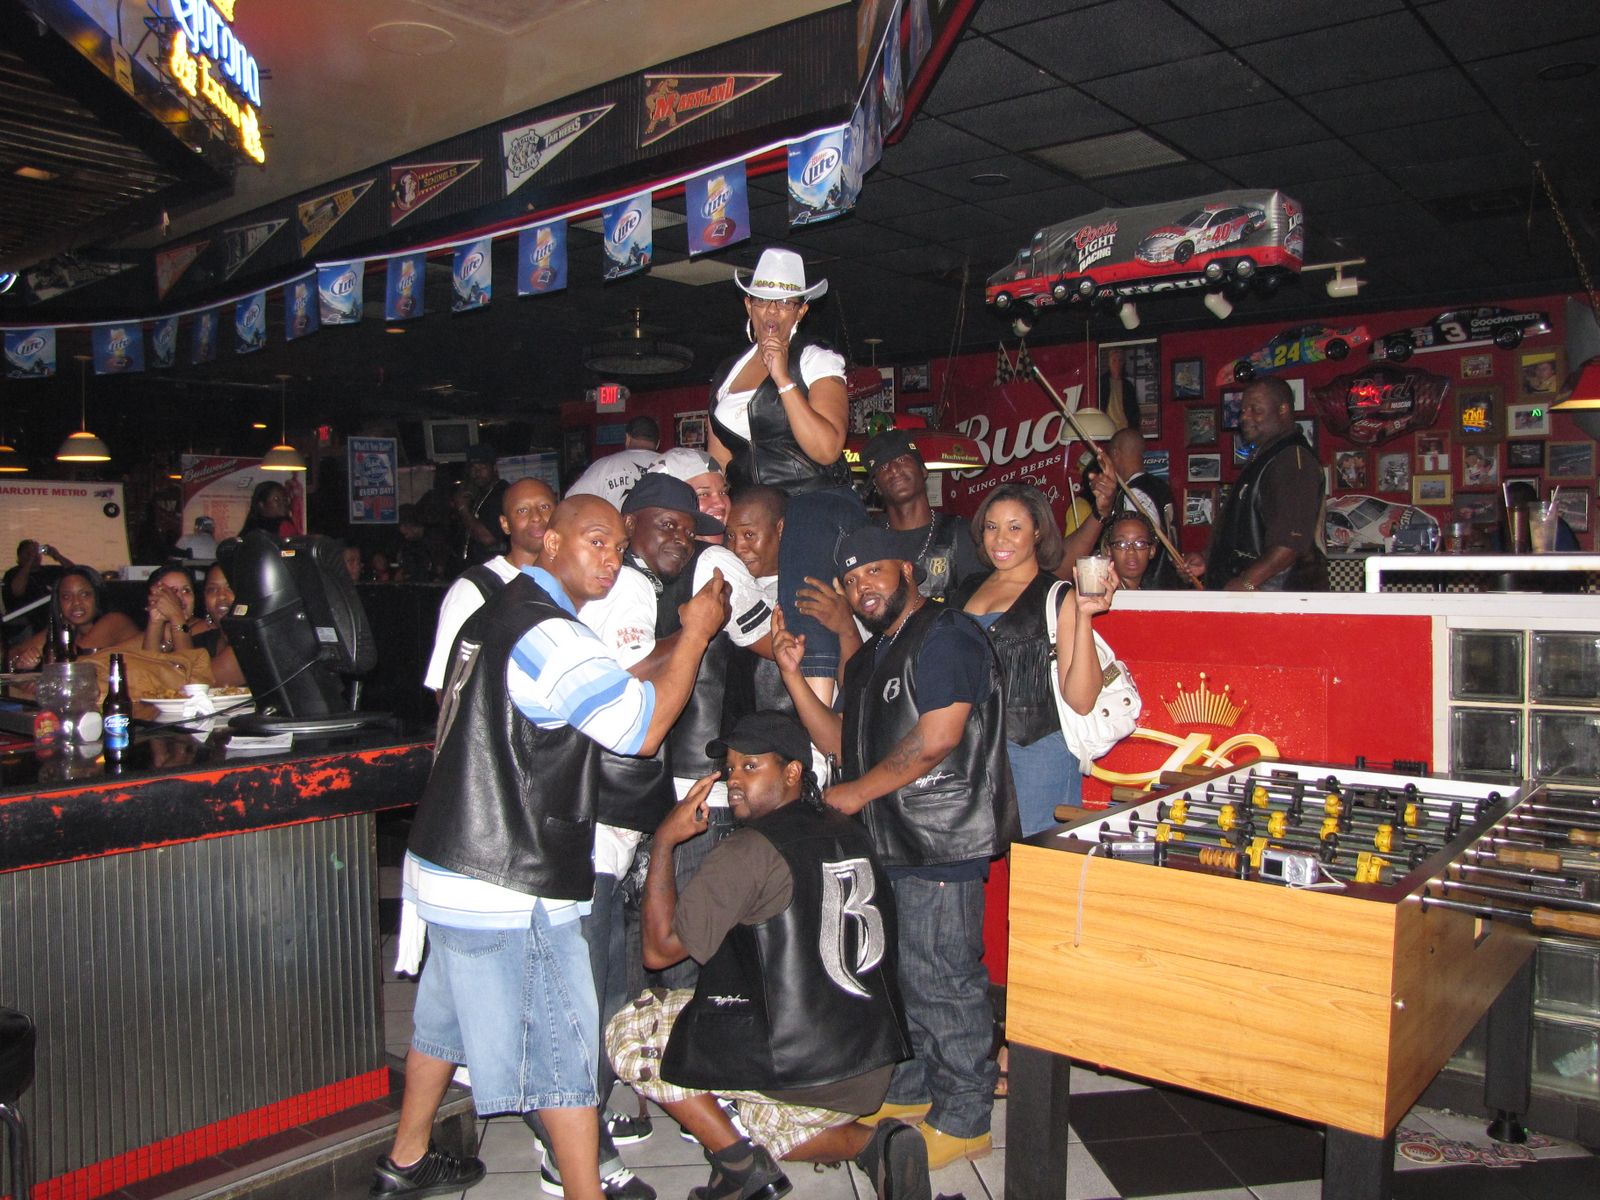 Chrisology: Ruff Ryders Anniv. Weekend.. Vacation day number